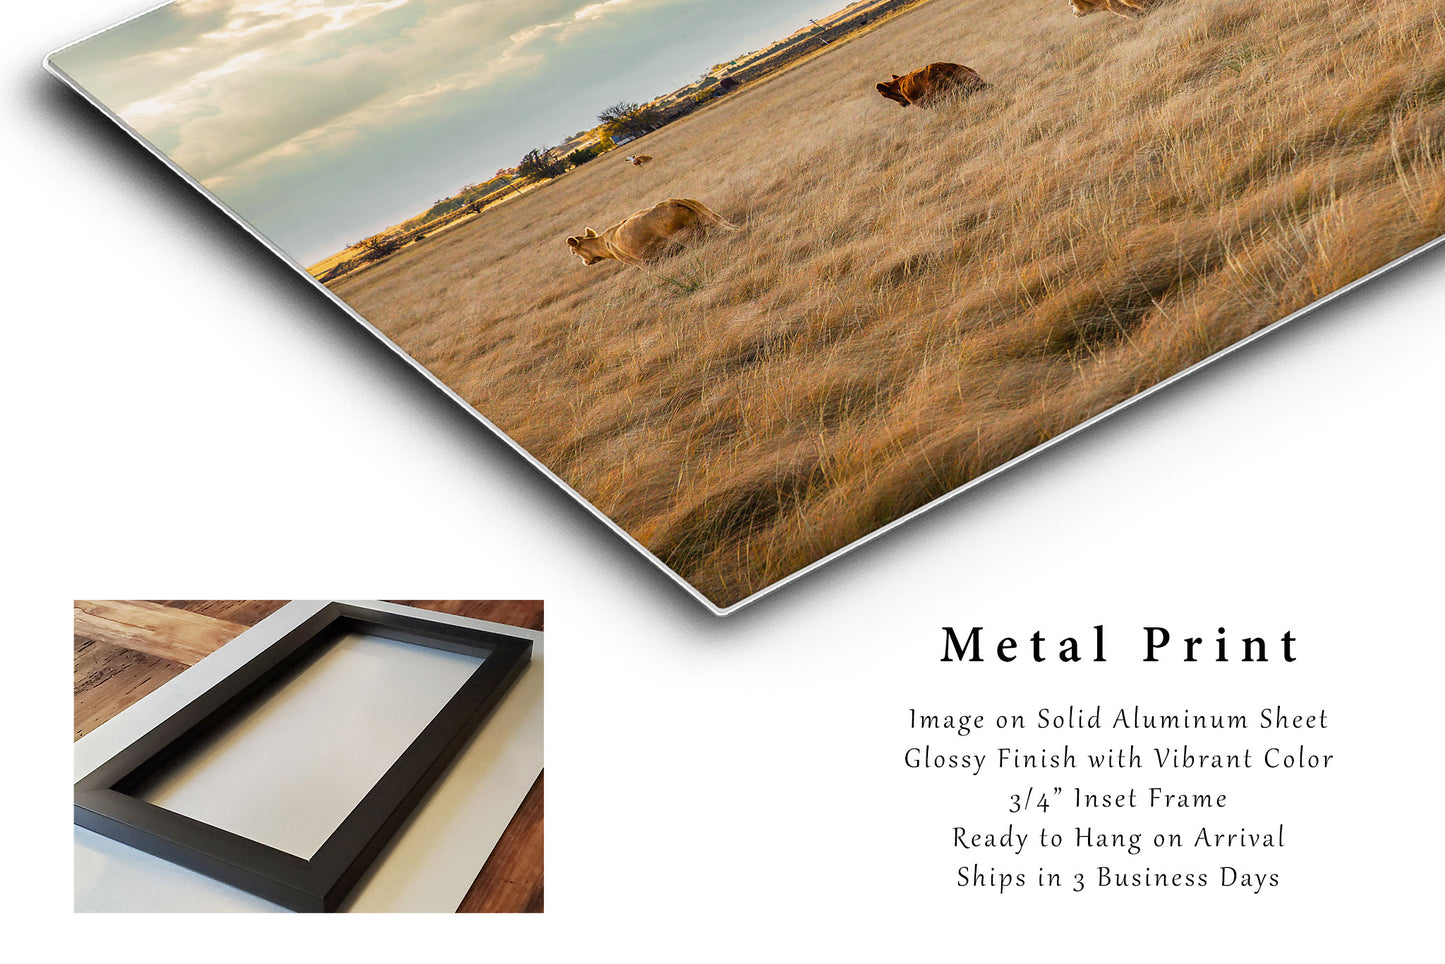 Cow Metal Print | Cattle Herd Photography | Farm and Ranch Wall Art | Texas Photo | Western Decor | Ready to Hang